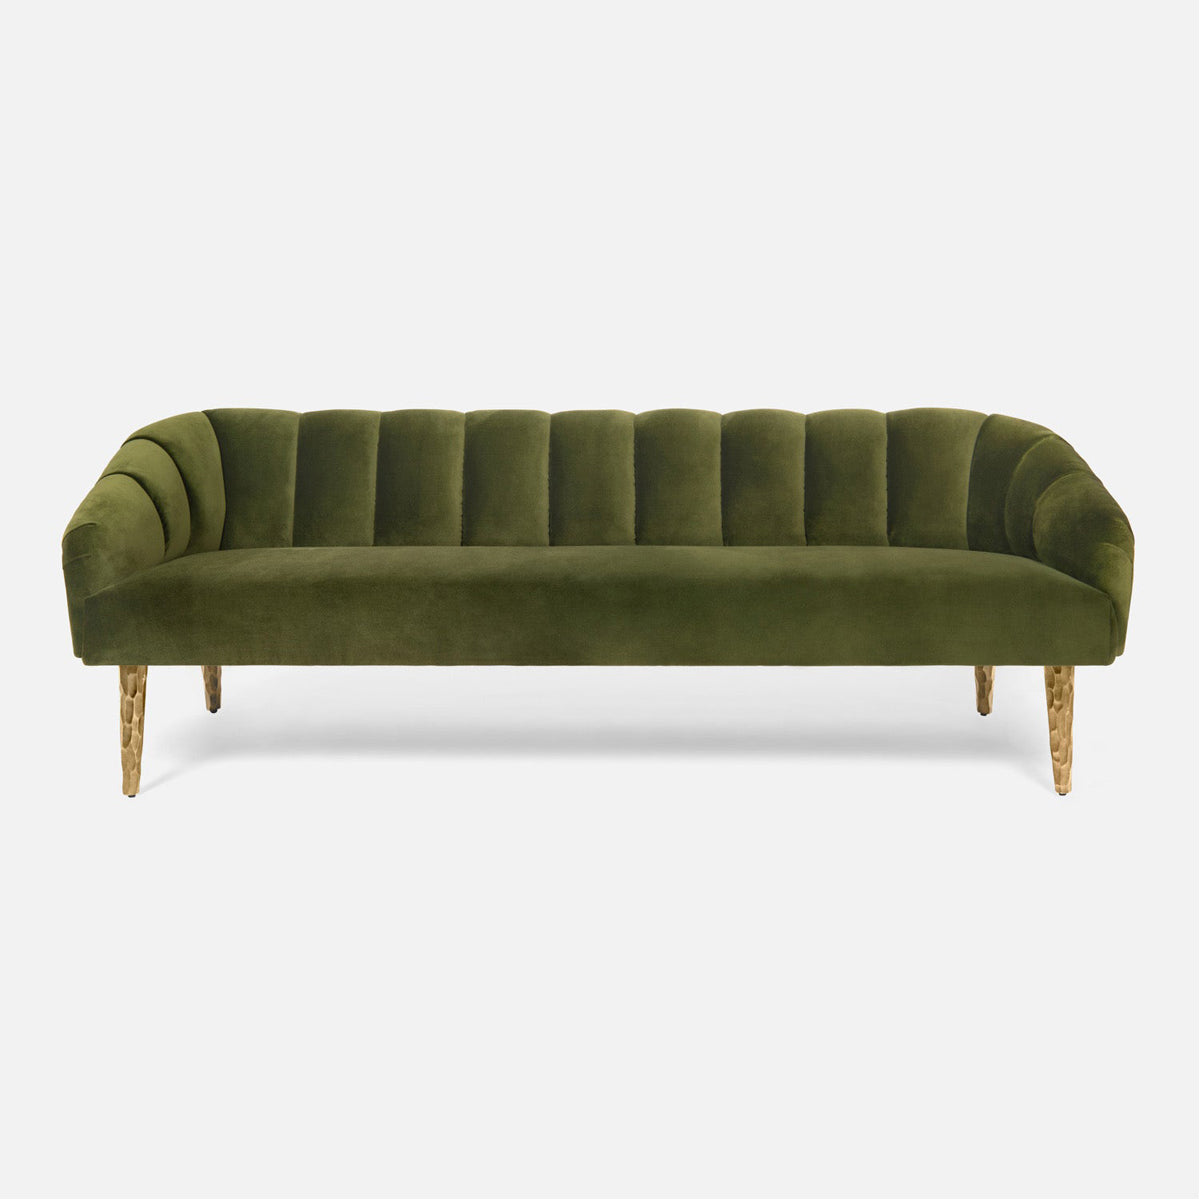 Made Goods Rooney Upholstered Shell Sofa in Humboldt Cotton Jute